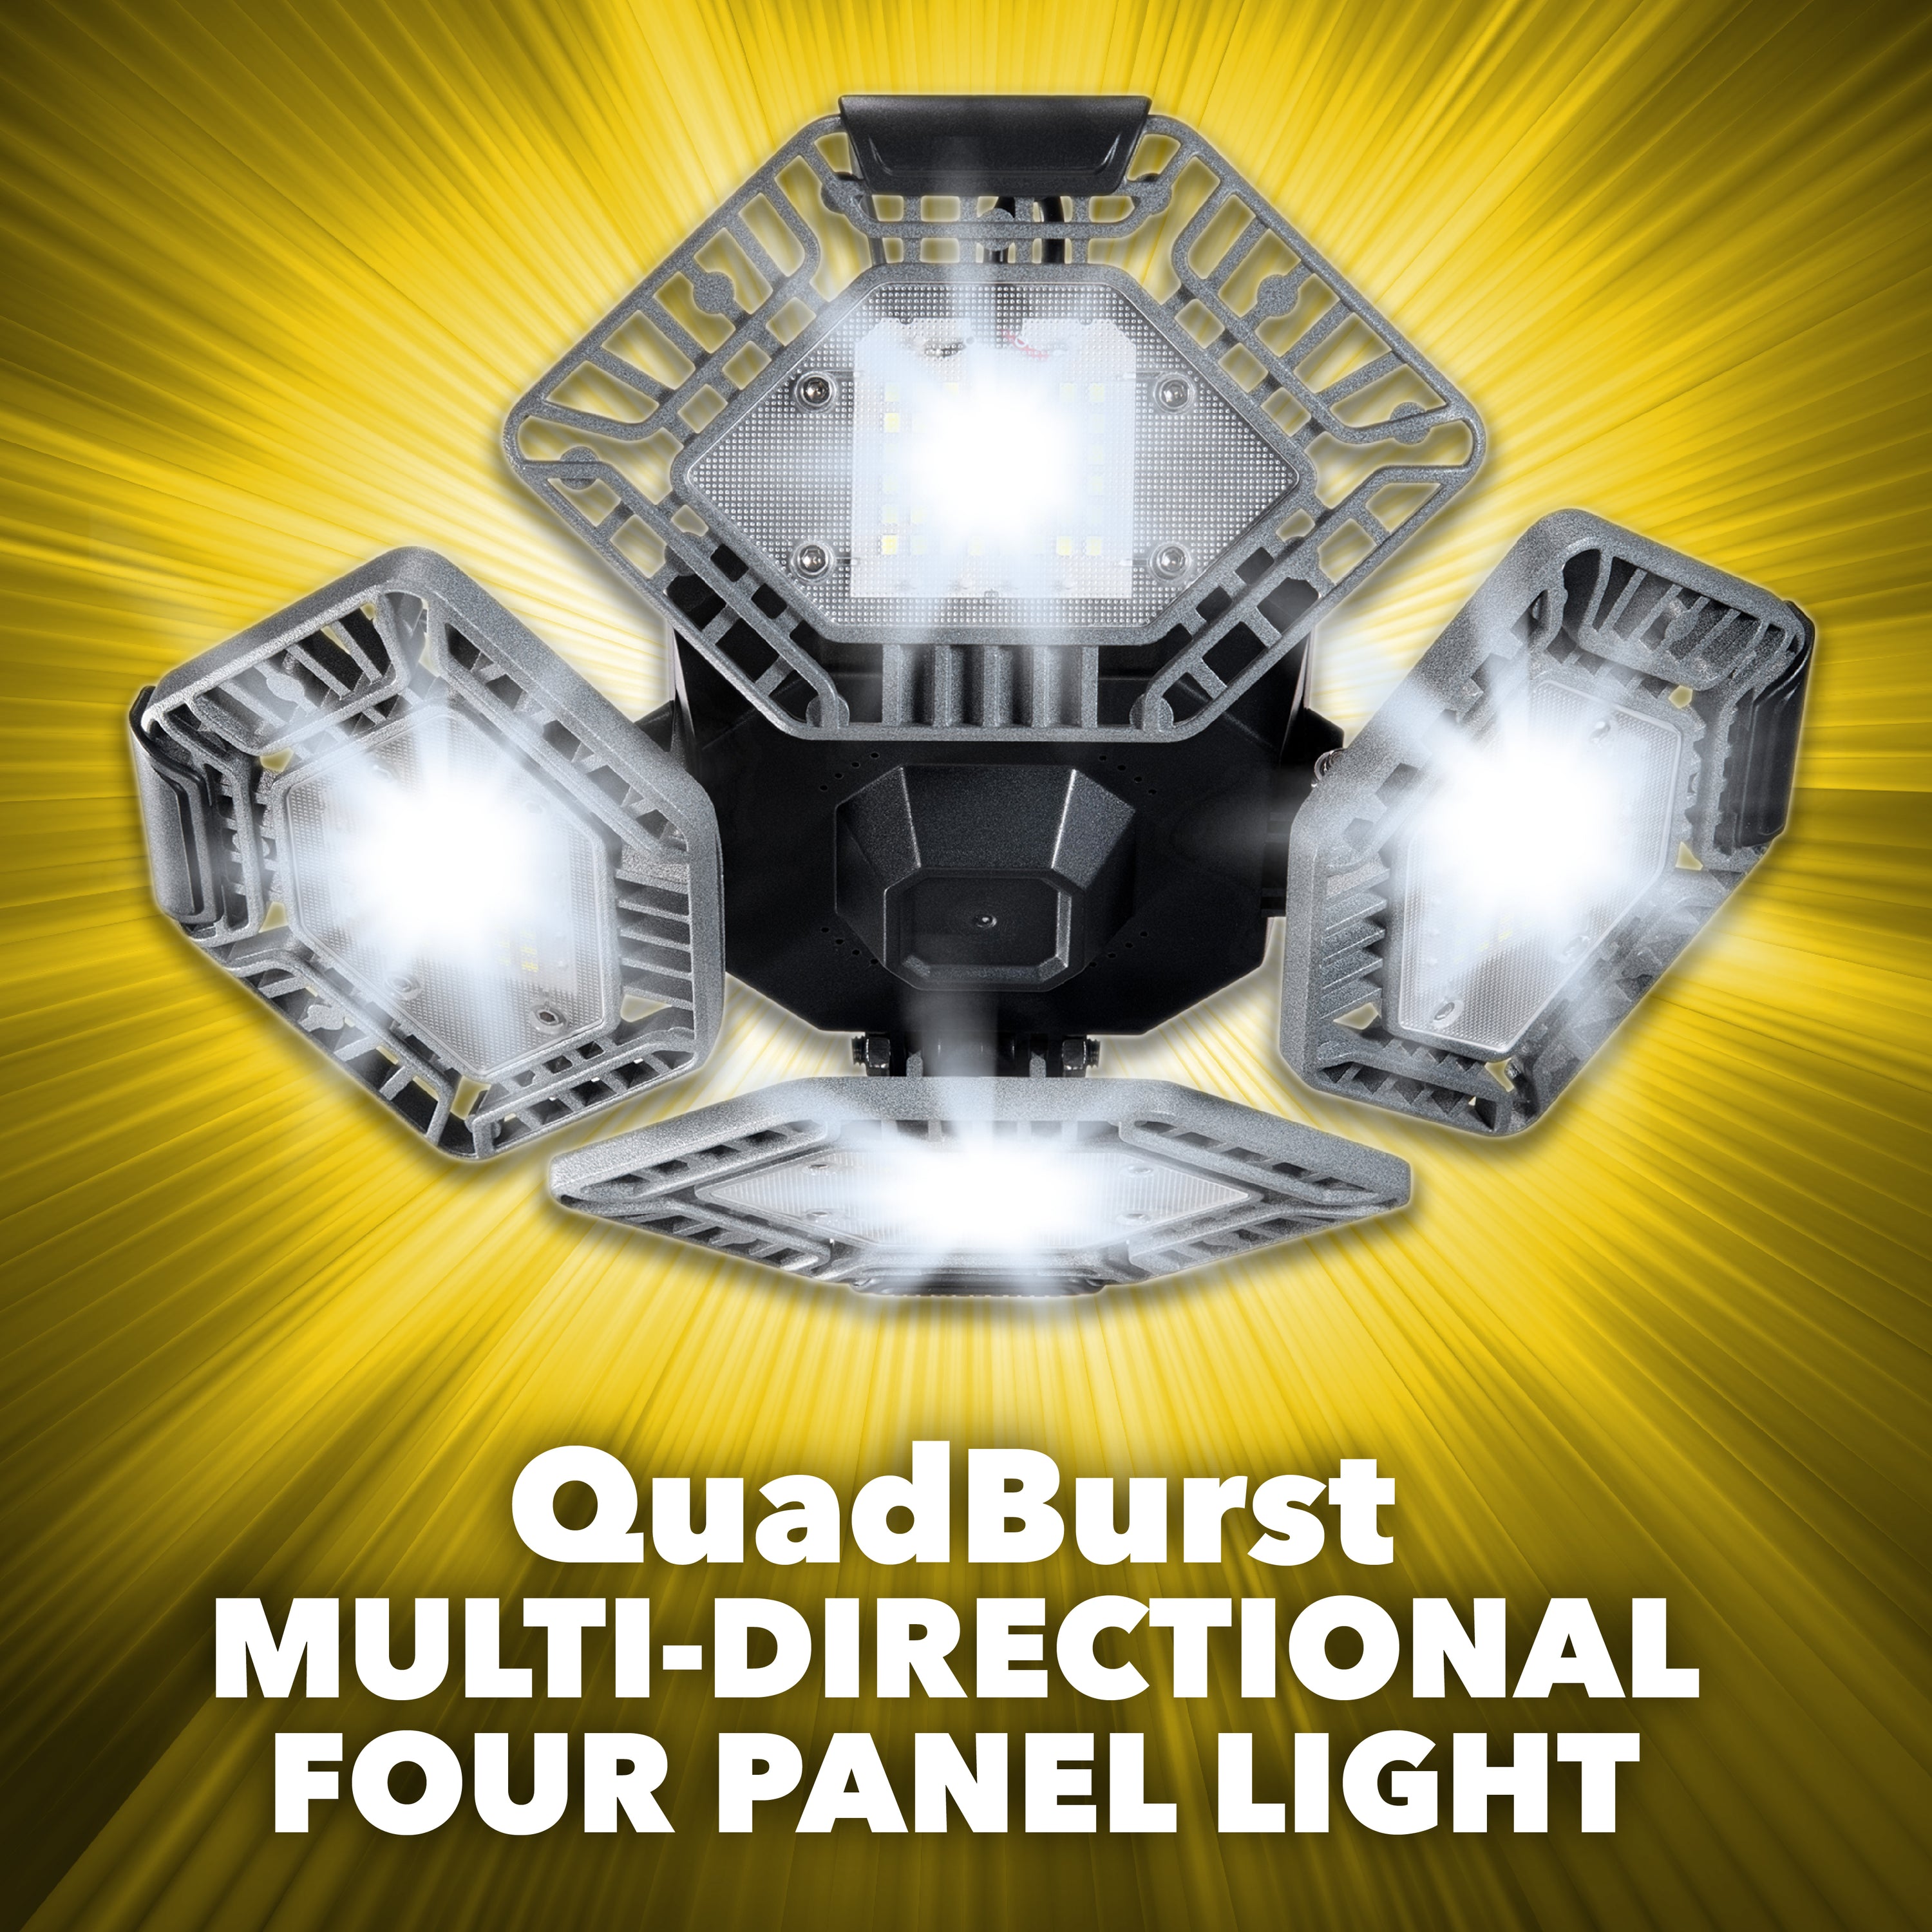 Bell+Howell Quadburst LED Lighting with 5,500 Lumens, 4 Multi-Directional Panels with 192 Ultra High-Intensity LED Bulbs, Simple Installation and Wireless